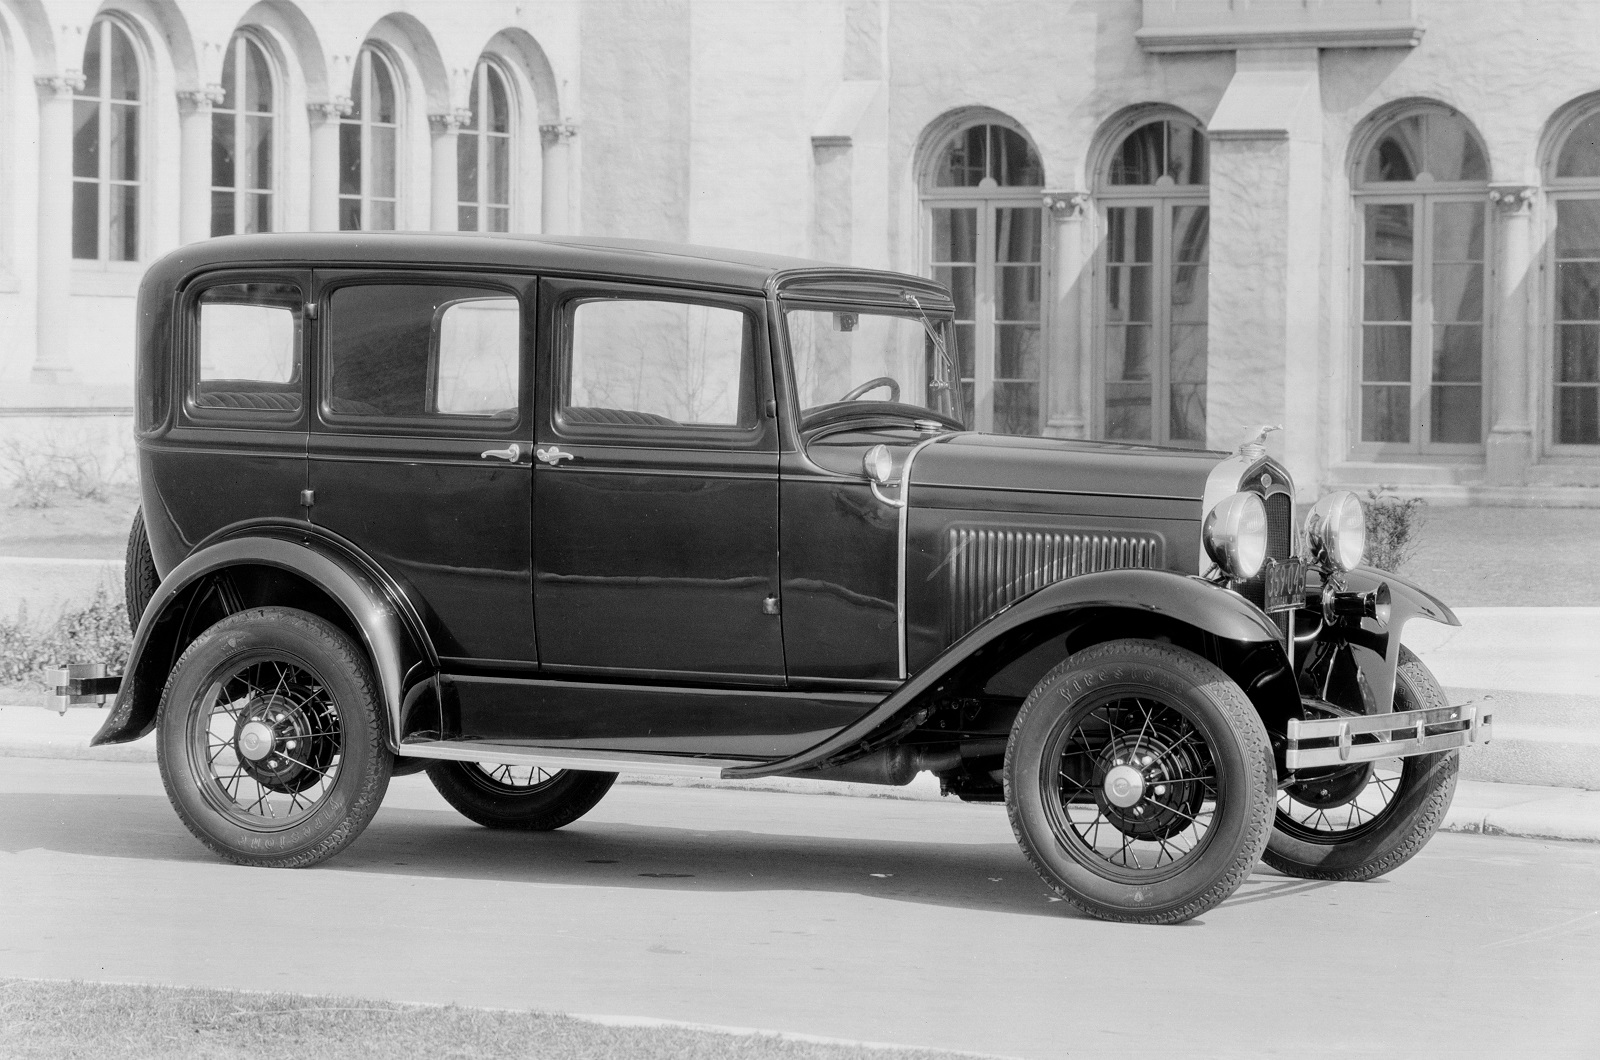 <p>Introduced in <strong>December 1927</strong>, the Model A benefitted from the lessons that Ford learned during nearly two decades of Model T production. It was notably available as what can be accurately described as a four-door saloon right a launch, a move that signalled the body style’s growing popularity. Again called Fordor, it spawned a factory-built taxi model sold in limited numbers.</p><p>Ford charged <strong>$585</strong> for the Fordor in 1928 (about $9000/£6500 today) and <strong>$600</strong> (around $9200/£6600) for the taxi, which was the most expensive member of the range that year. Priced and sized right, the Model A enjoyed an immense amount of success. The <strong>millionth example</strong> was built in <strong>February 1929</strong>, a little over a year after series production started, and the <strong>two millionth unit</strong> was made in <strong>July 1929</strong>.</p>